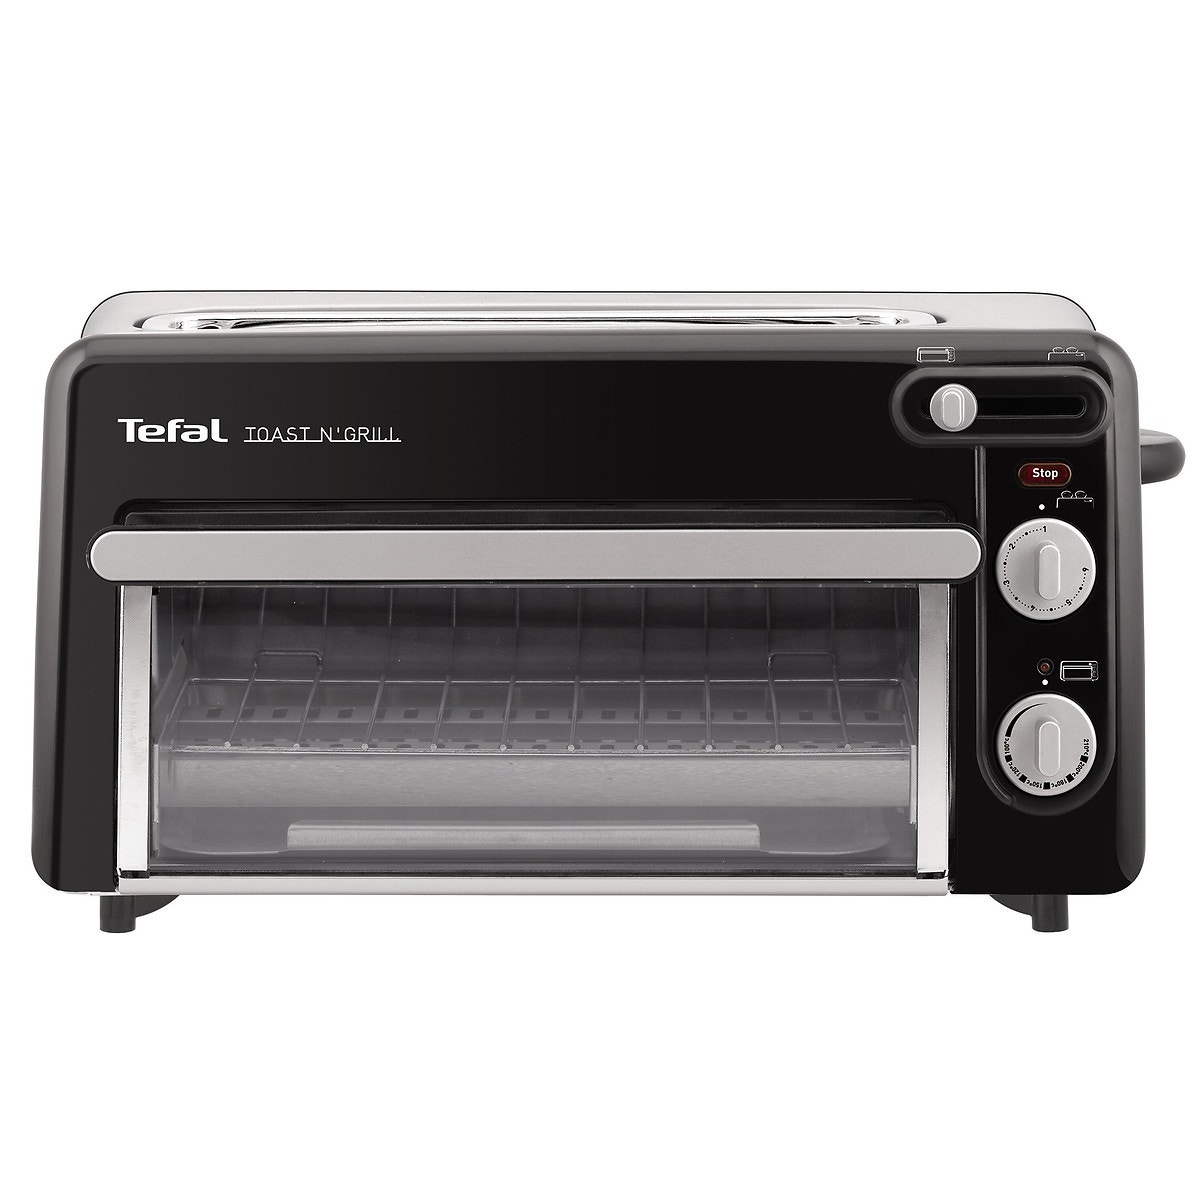 Grille-pain MOULINEX TL302110 TOASTER SIMPLE FENTE